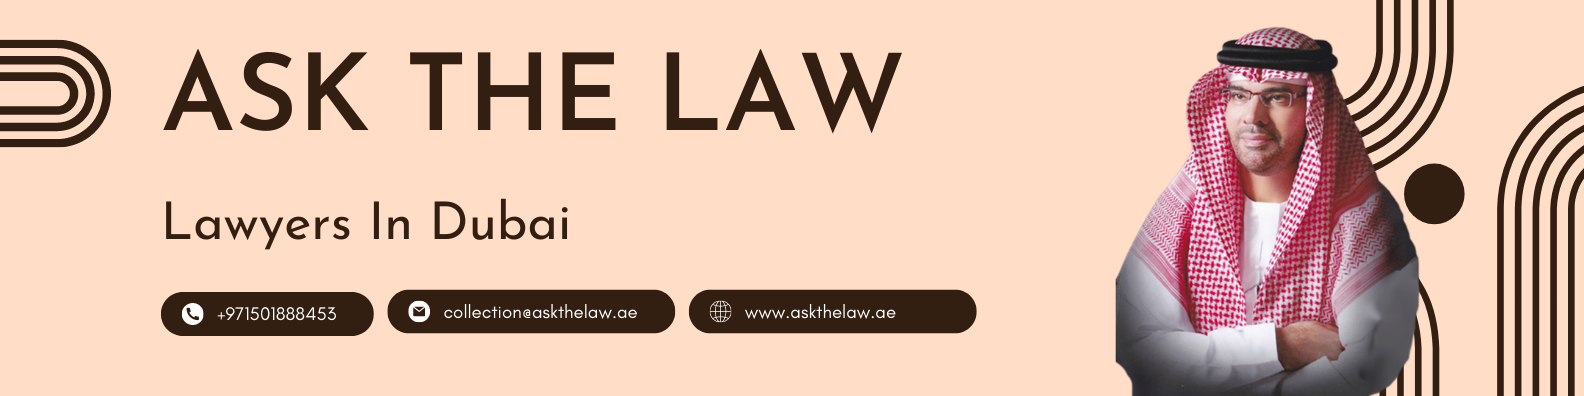 ASK THE LAW - Lawyers &amp; Legal Consultants in Dubai - Debt Collection cover